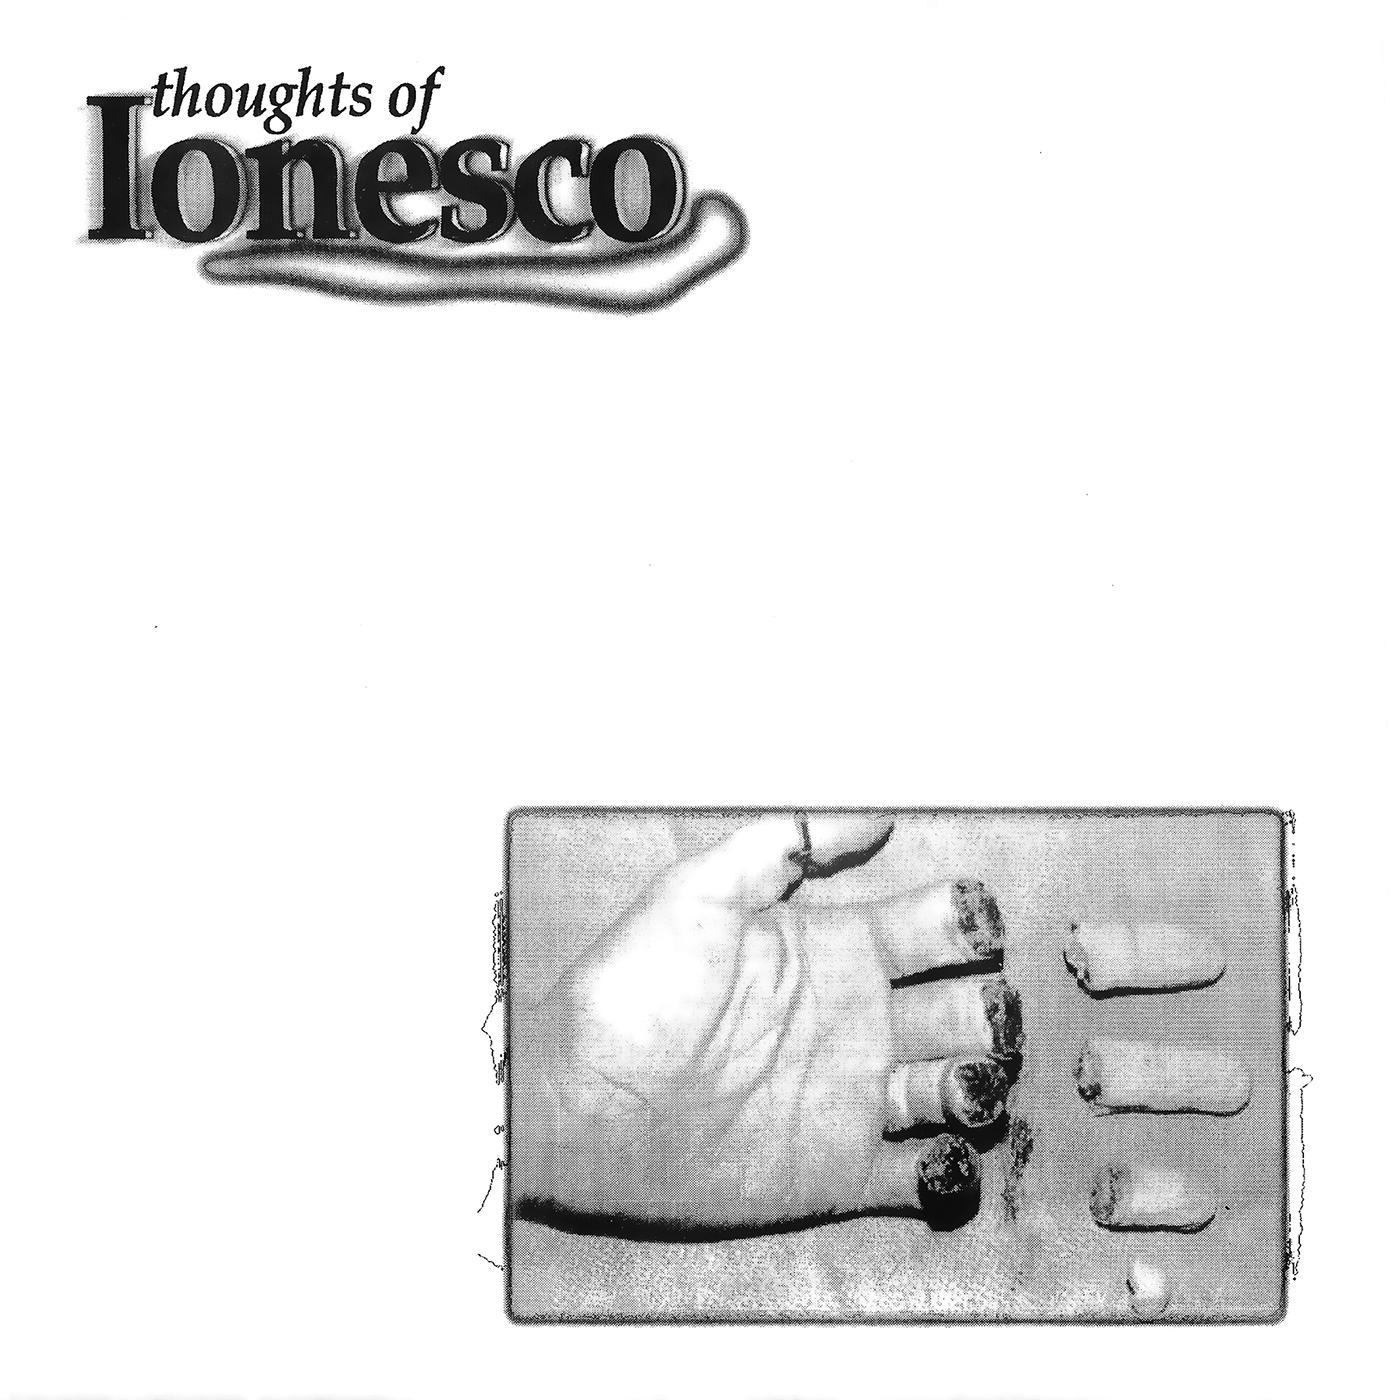 Cascade Records 6º - Thoughts of Ionesco, 7" vinyl, 1996